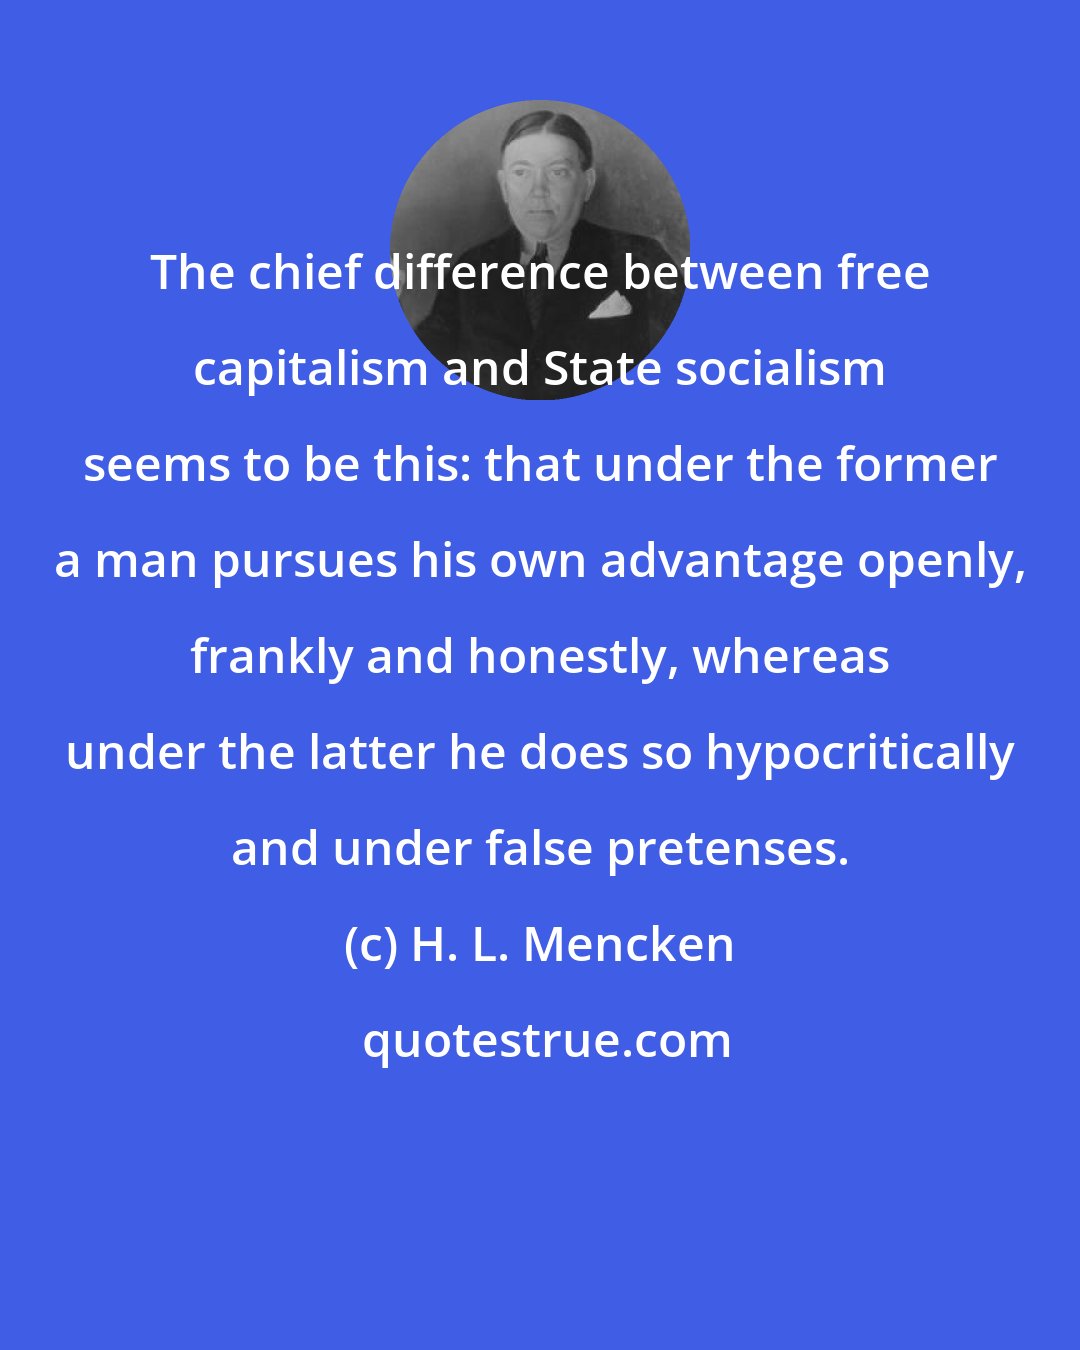 H. L. Mencken: The chief difference between free capitalism and State socialism seems to be this: that under the former a man pursues his own advantage openly, frankly and honestly, whereas under the latter he does so hypocritically and under false pretenses.